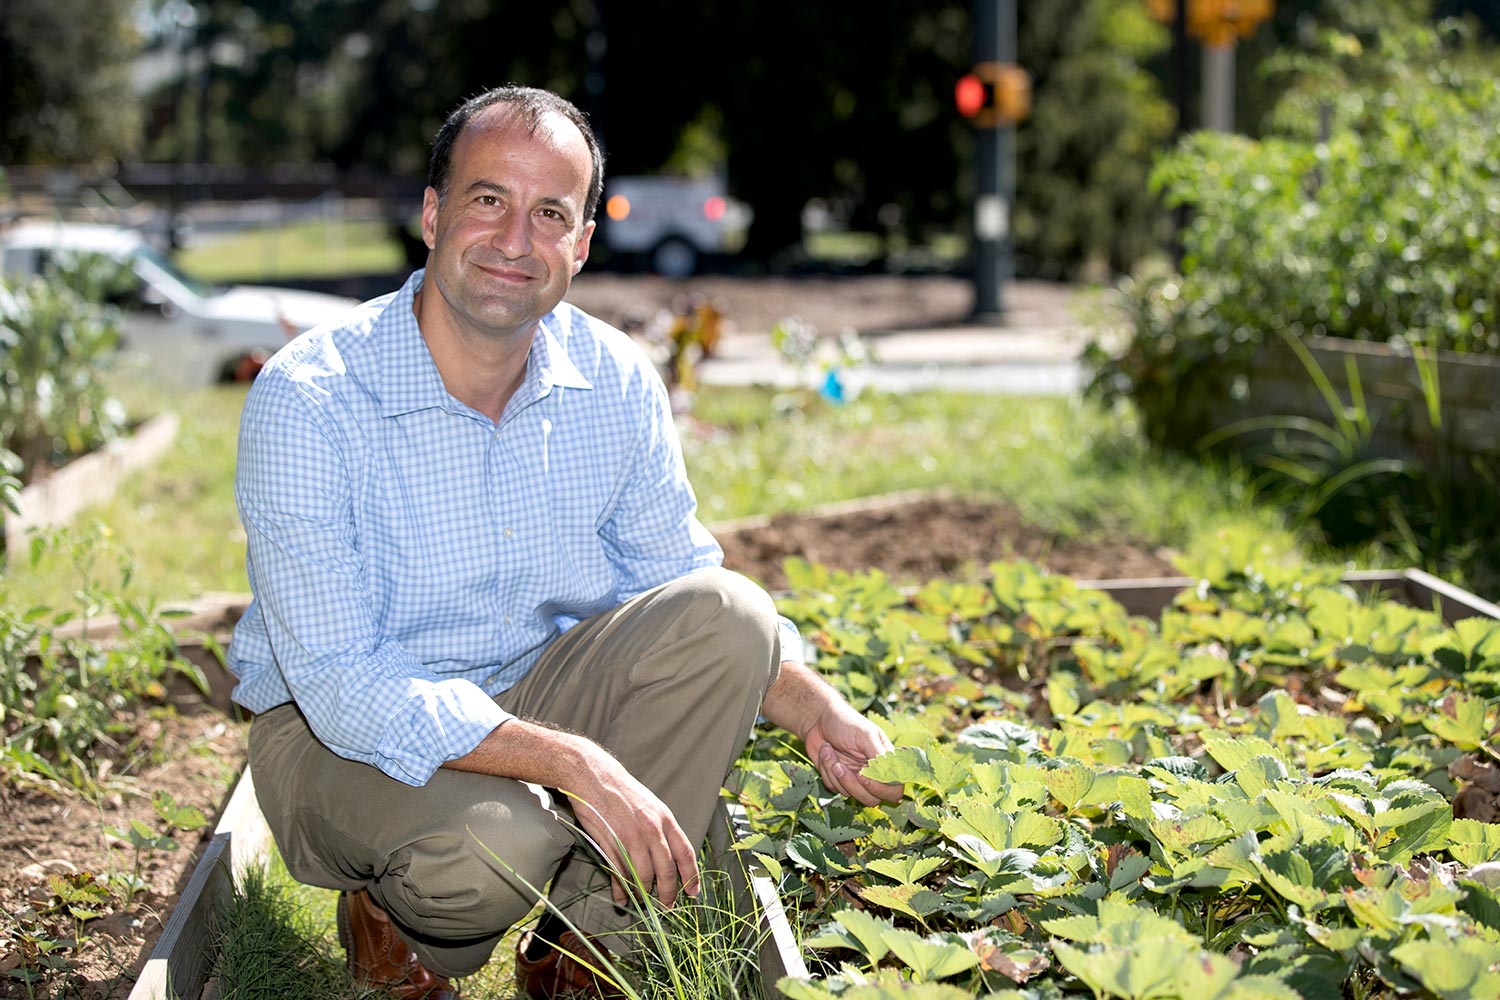 Associate economics professor Federico Ciliberto co-led the largest research study to date examining how genetically modified soybeans and maize have impacted pesticide use in the U.S.